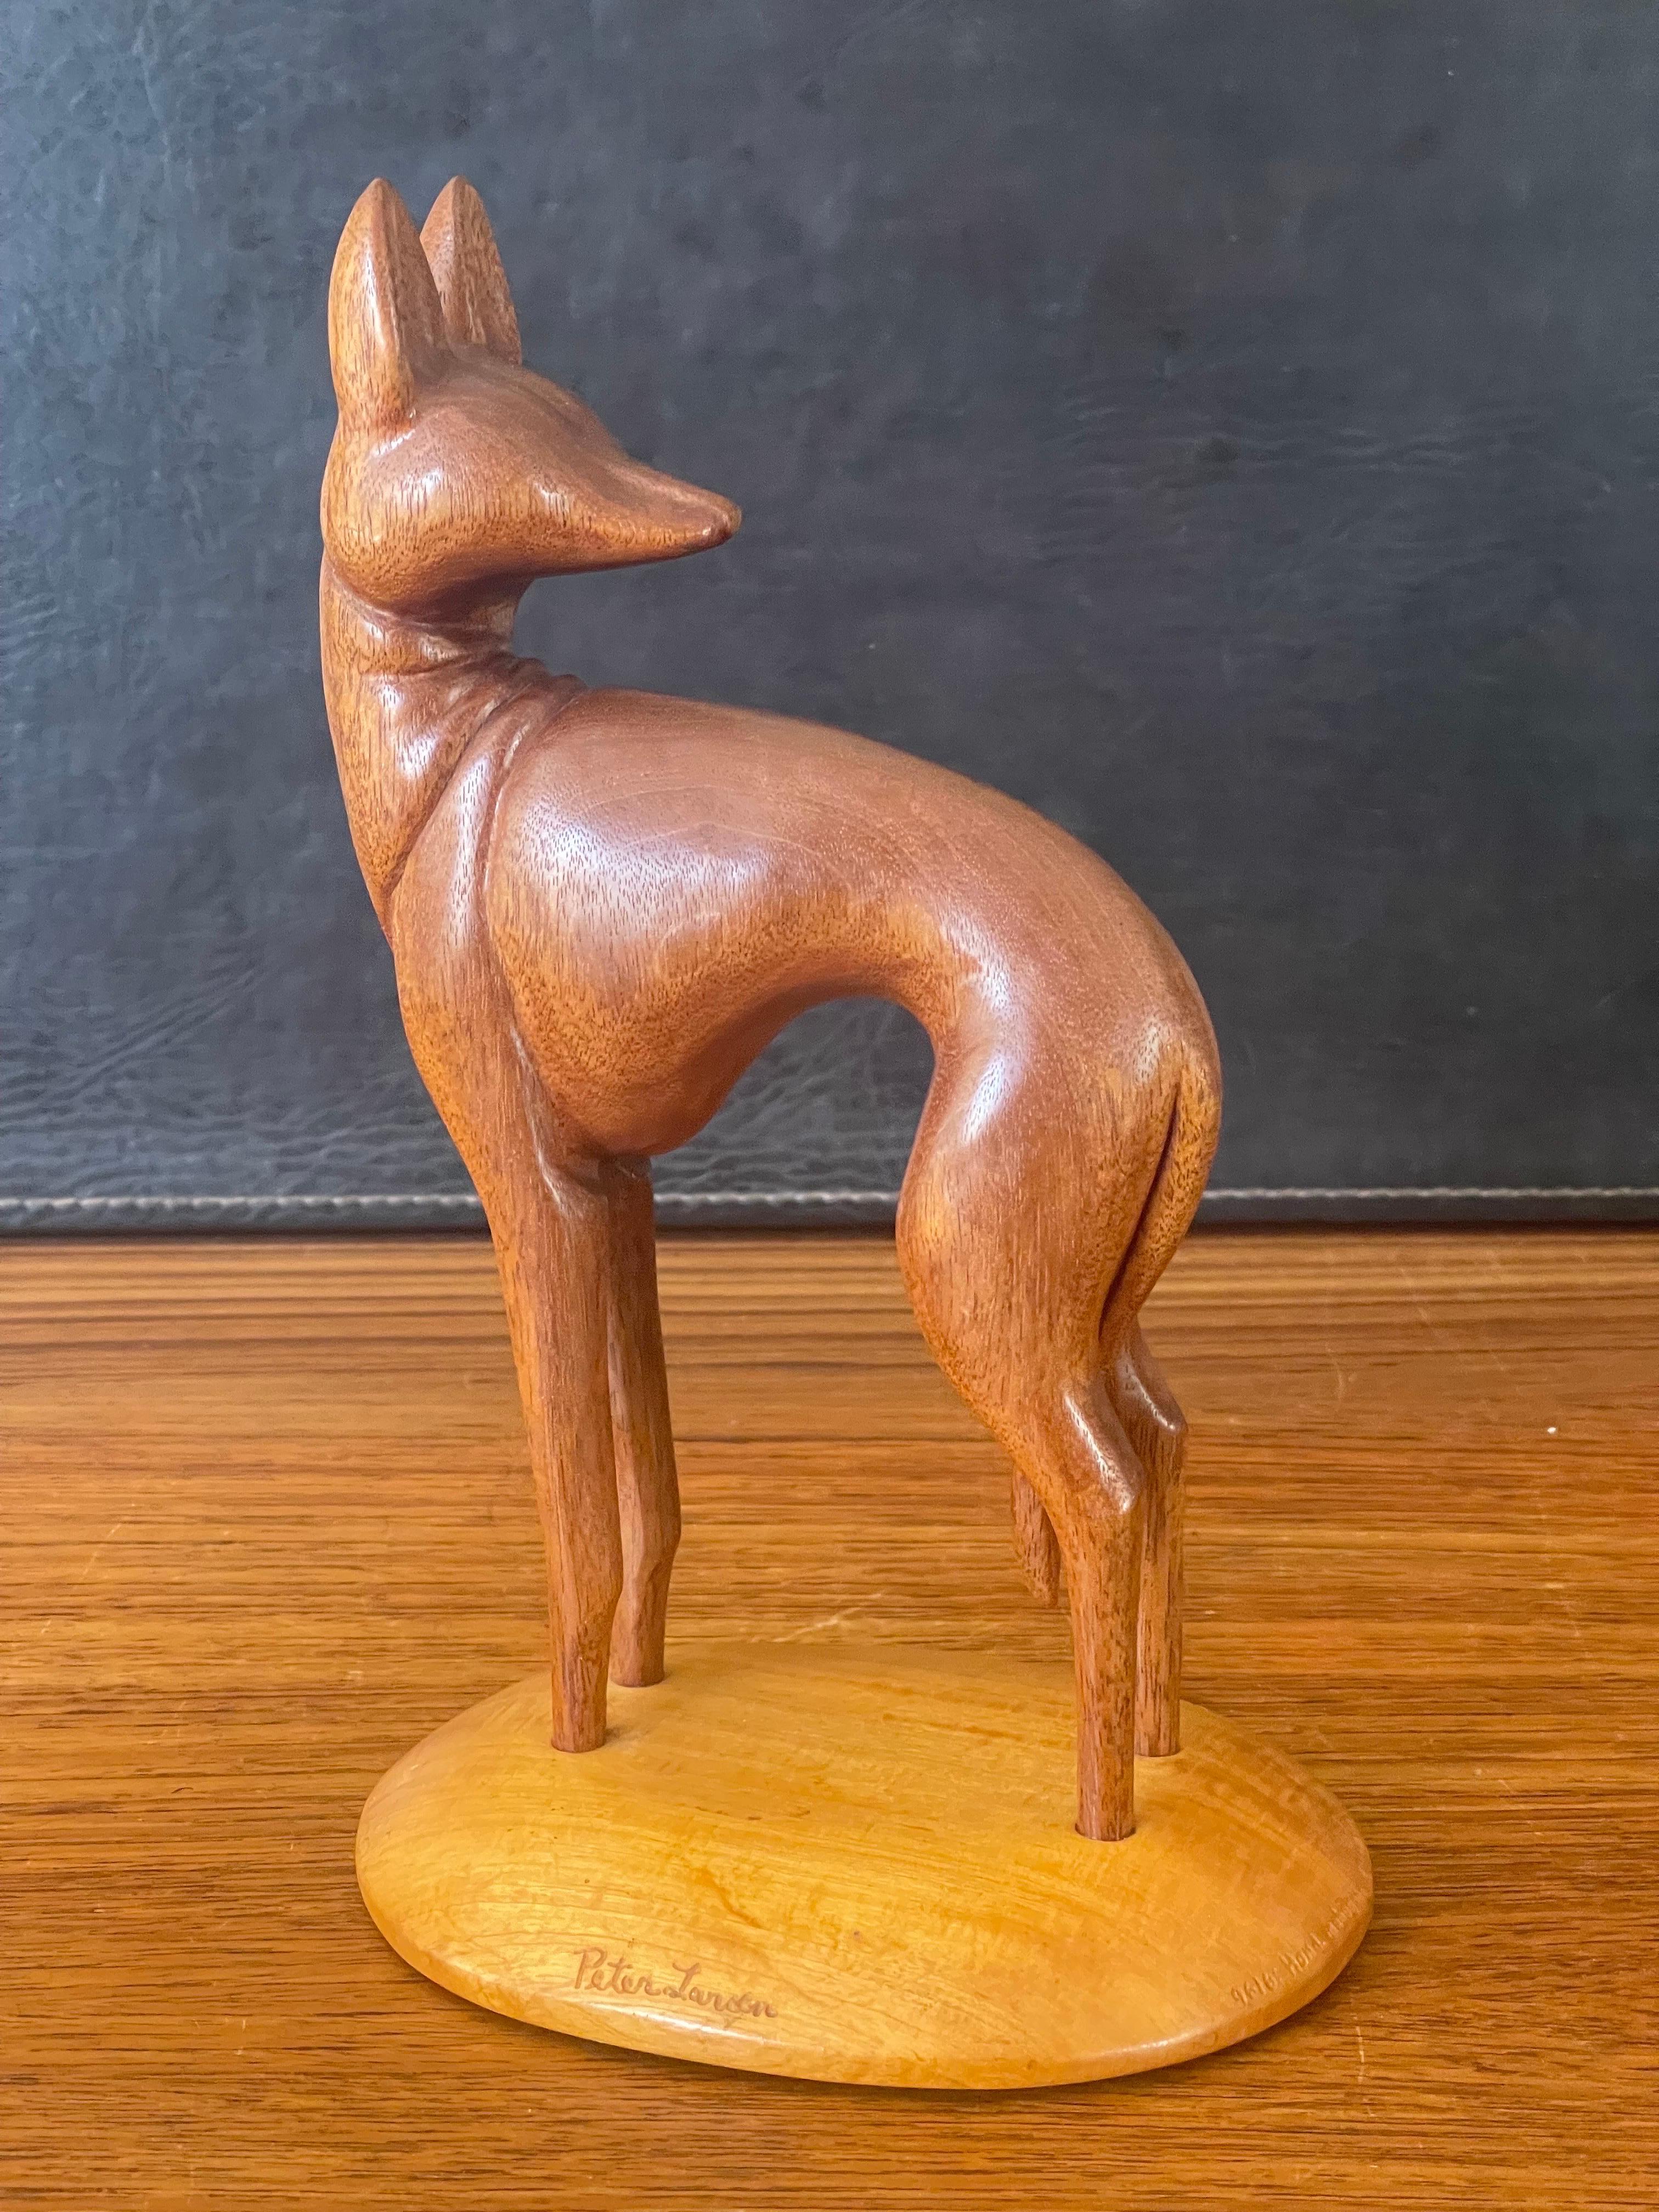 A very cool hand carved teak greyhound sculpture on maple base by Peter Larsen, circa 1980s. The piece is in very good condition with no chips or cracks, is signed on the base and measures 5.5 W x 5.5